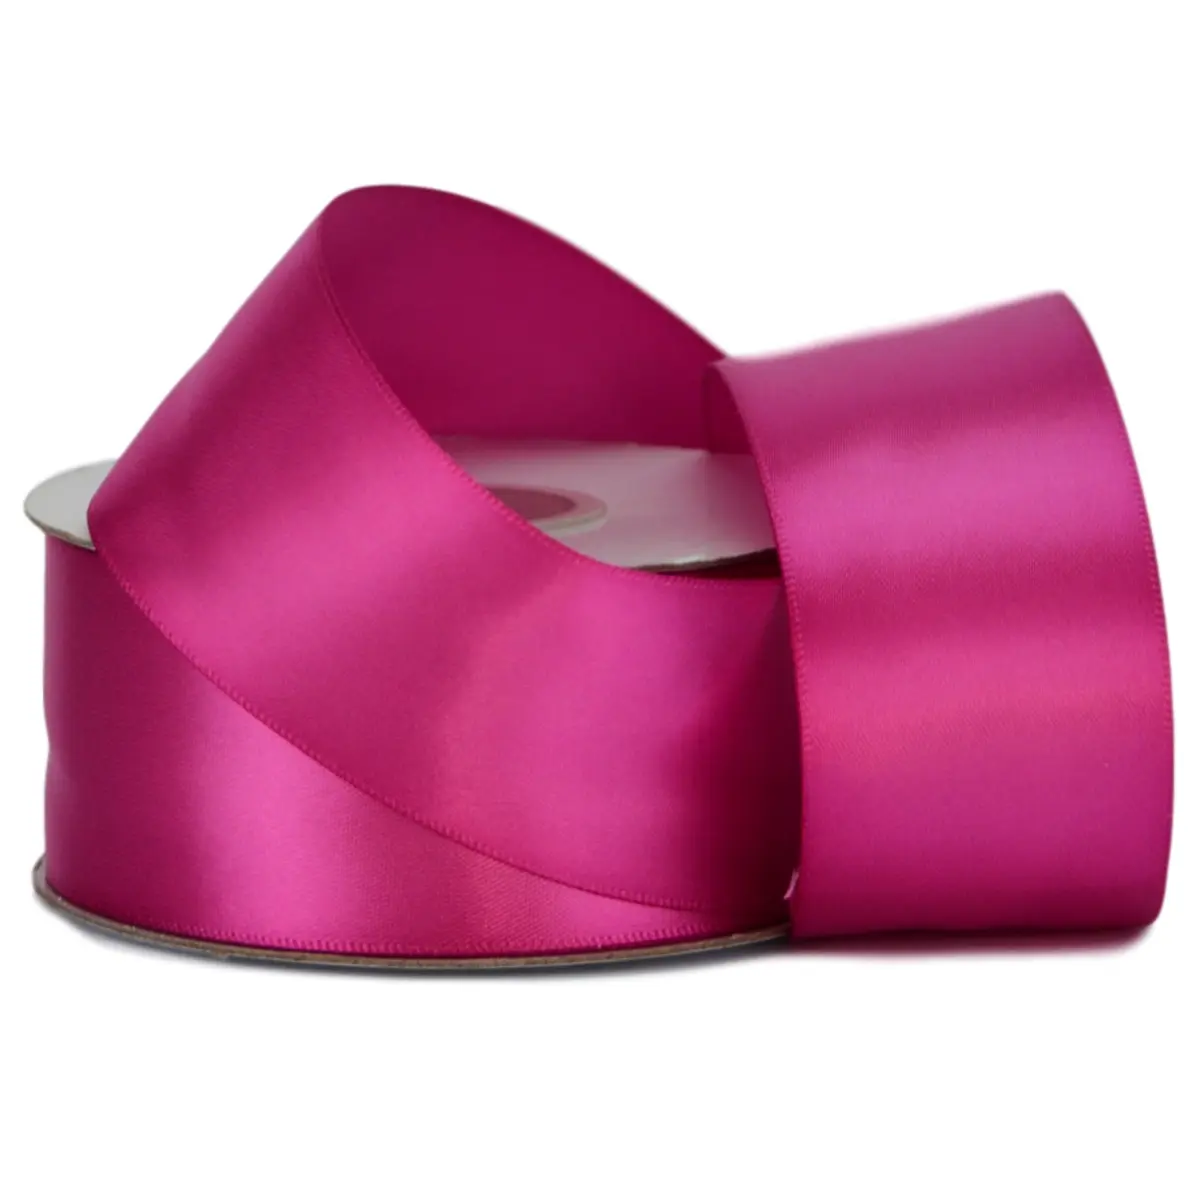 Main Image 38mm Double Sided Satin<br>Cerise x 25mtr